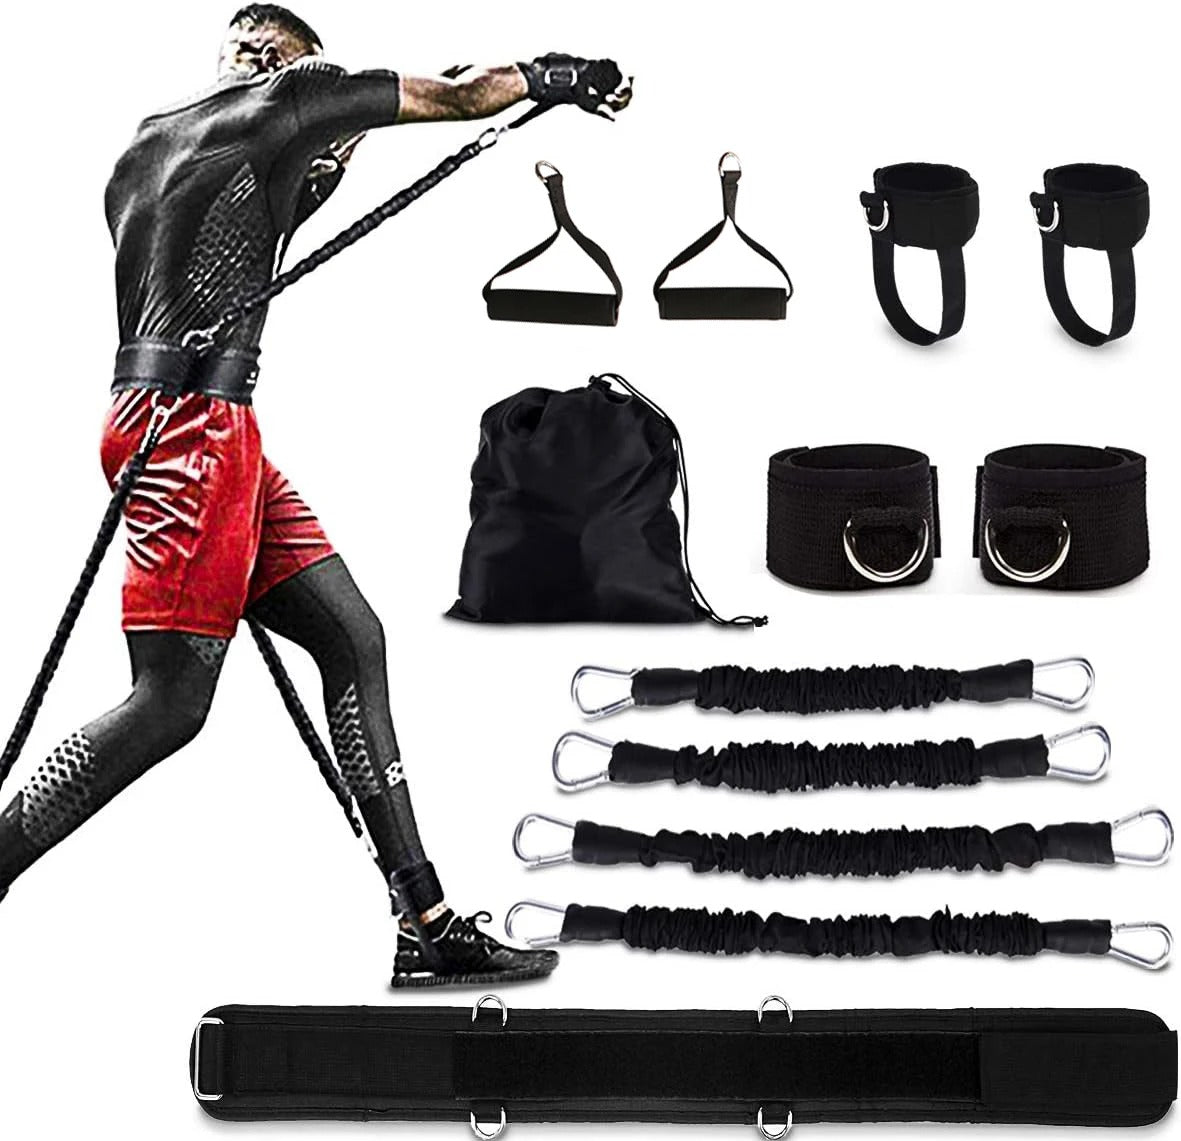 Boxing Resistance Bands